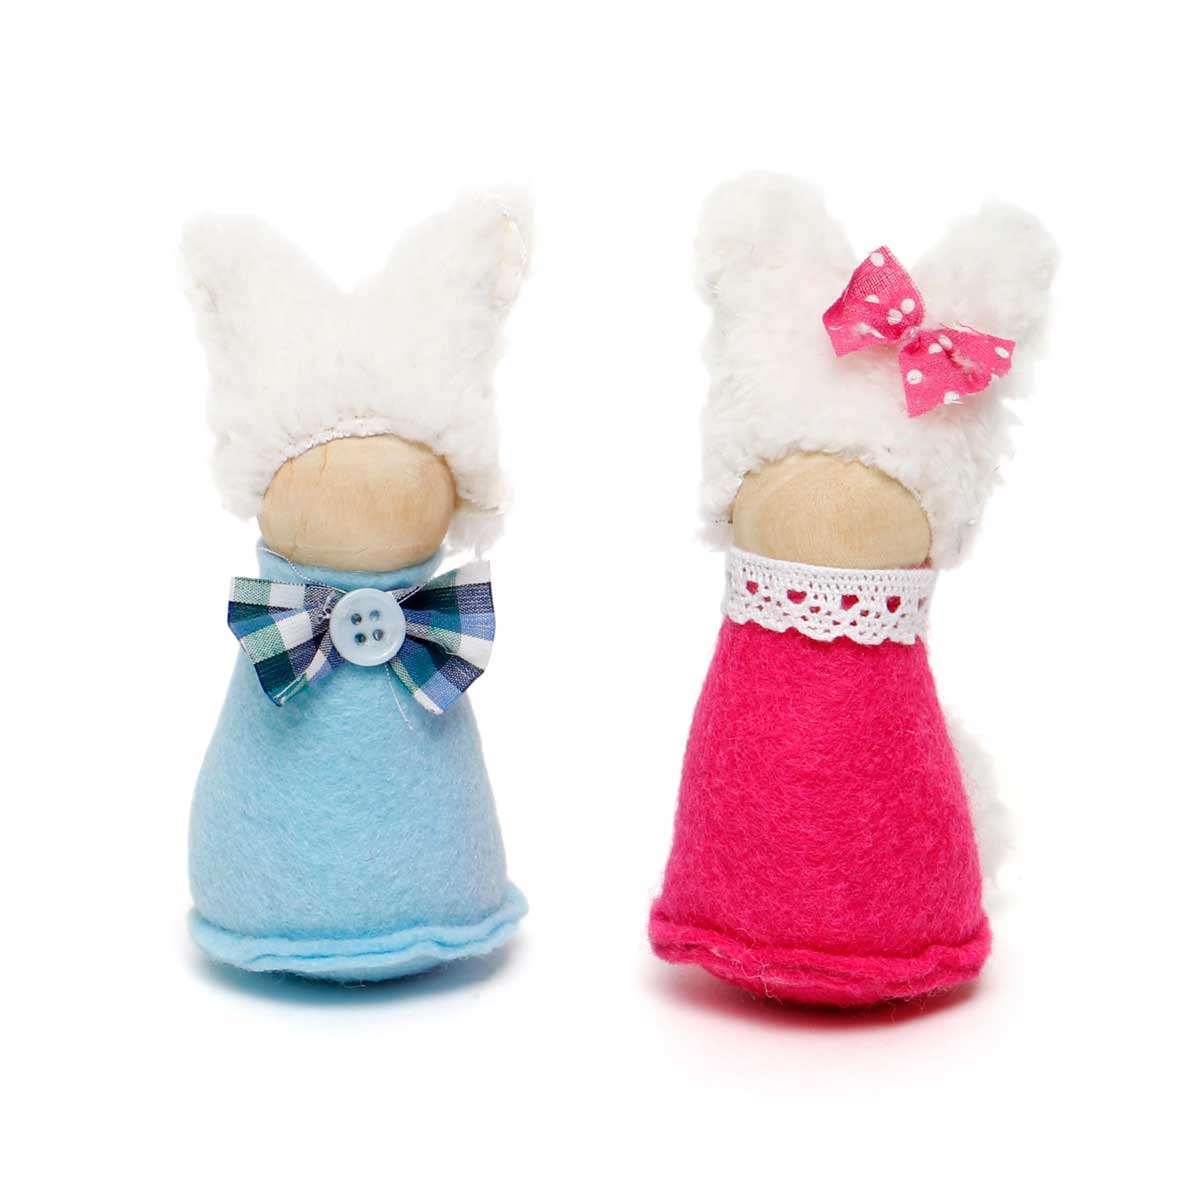 BUNNY KIDS WITH WOOD HEAD BLUE/PINK 2"X2.5"X4.5" SET OF 2